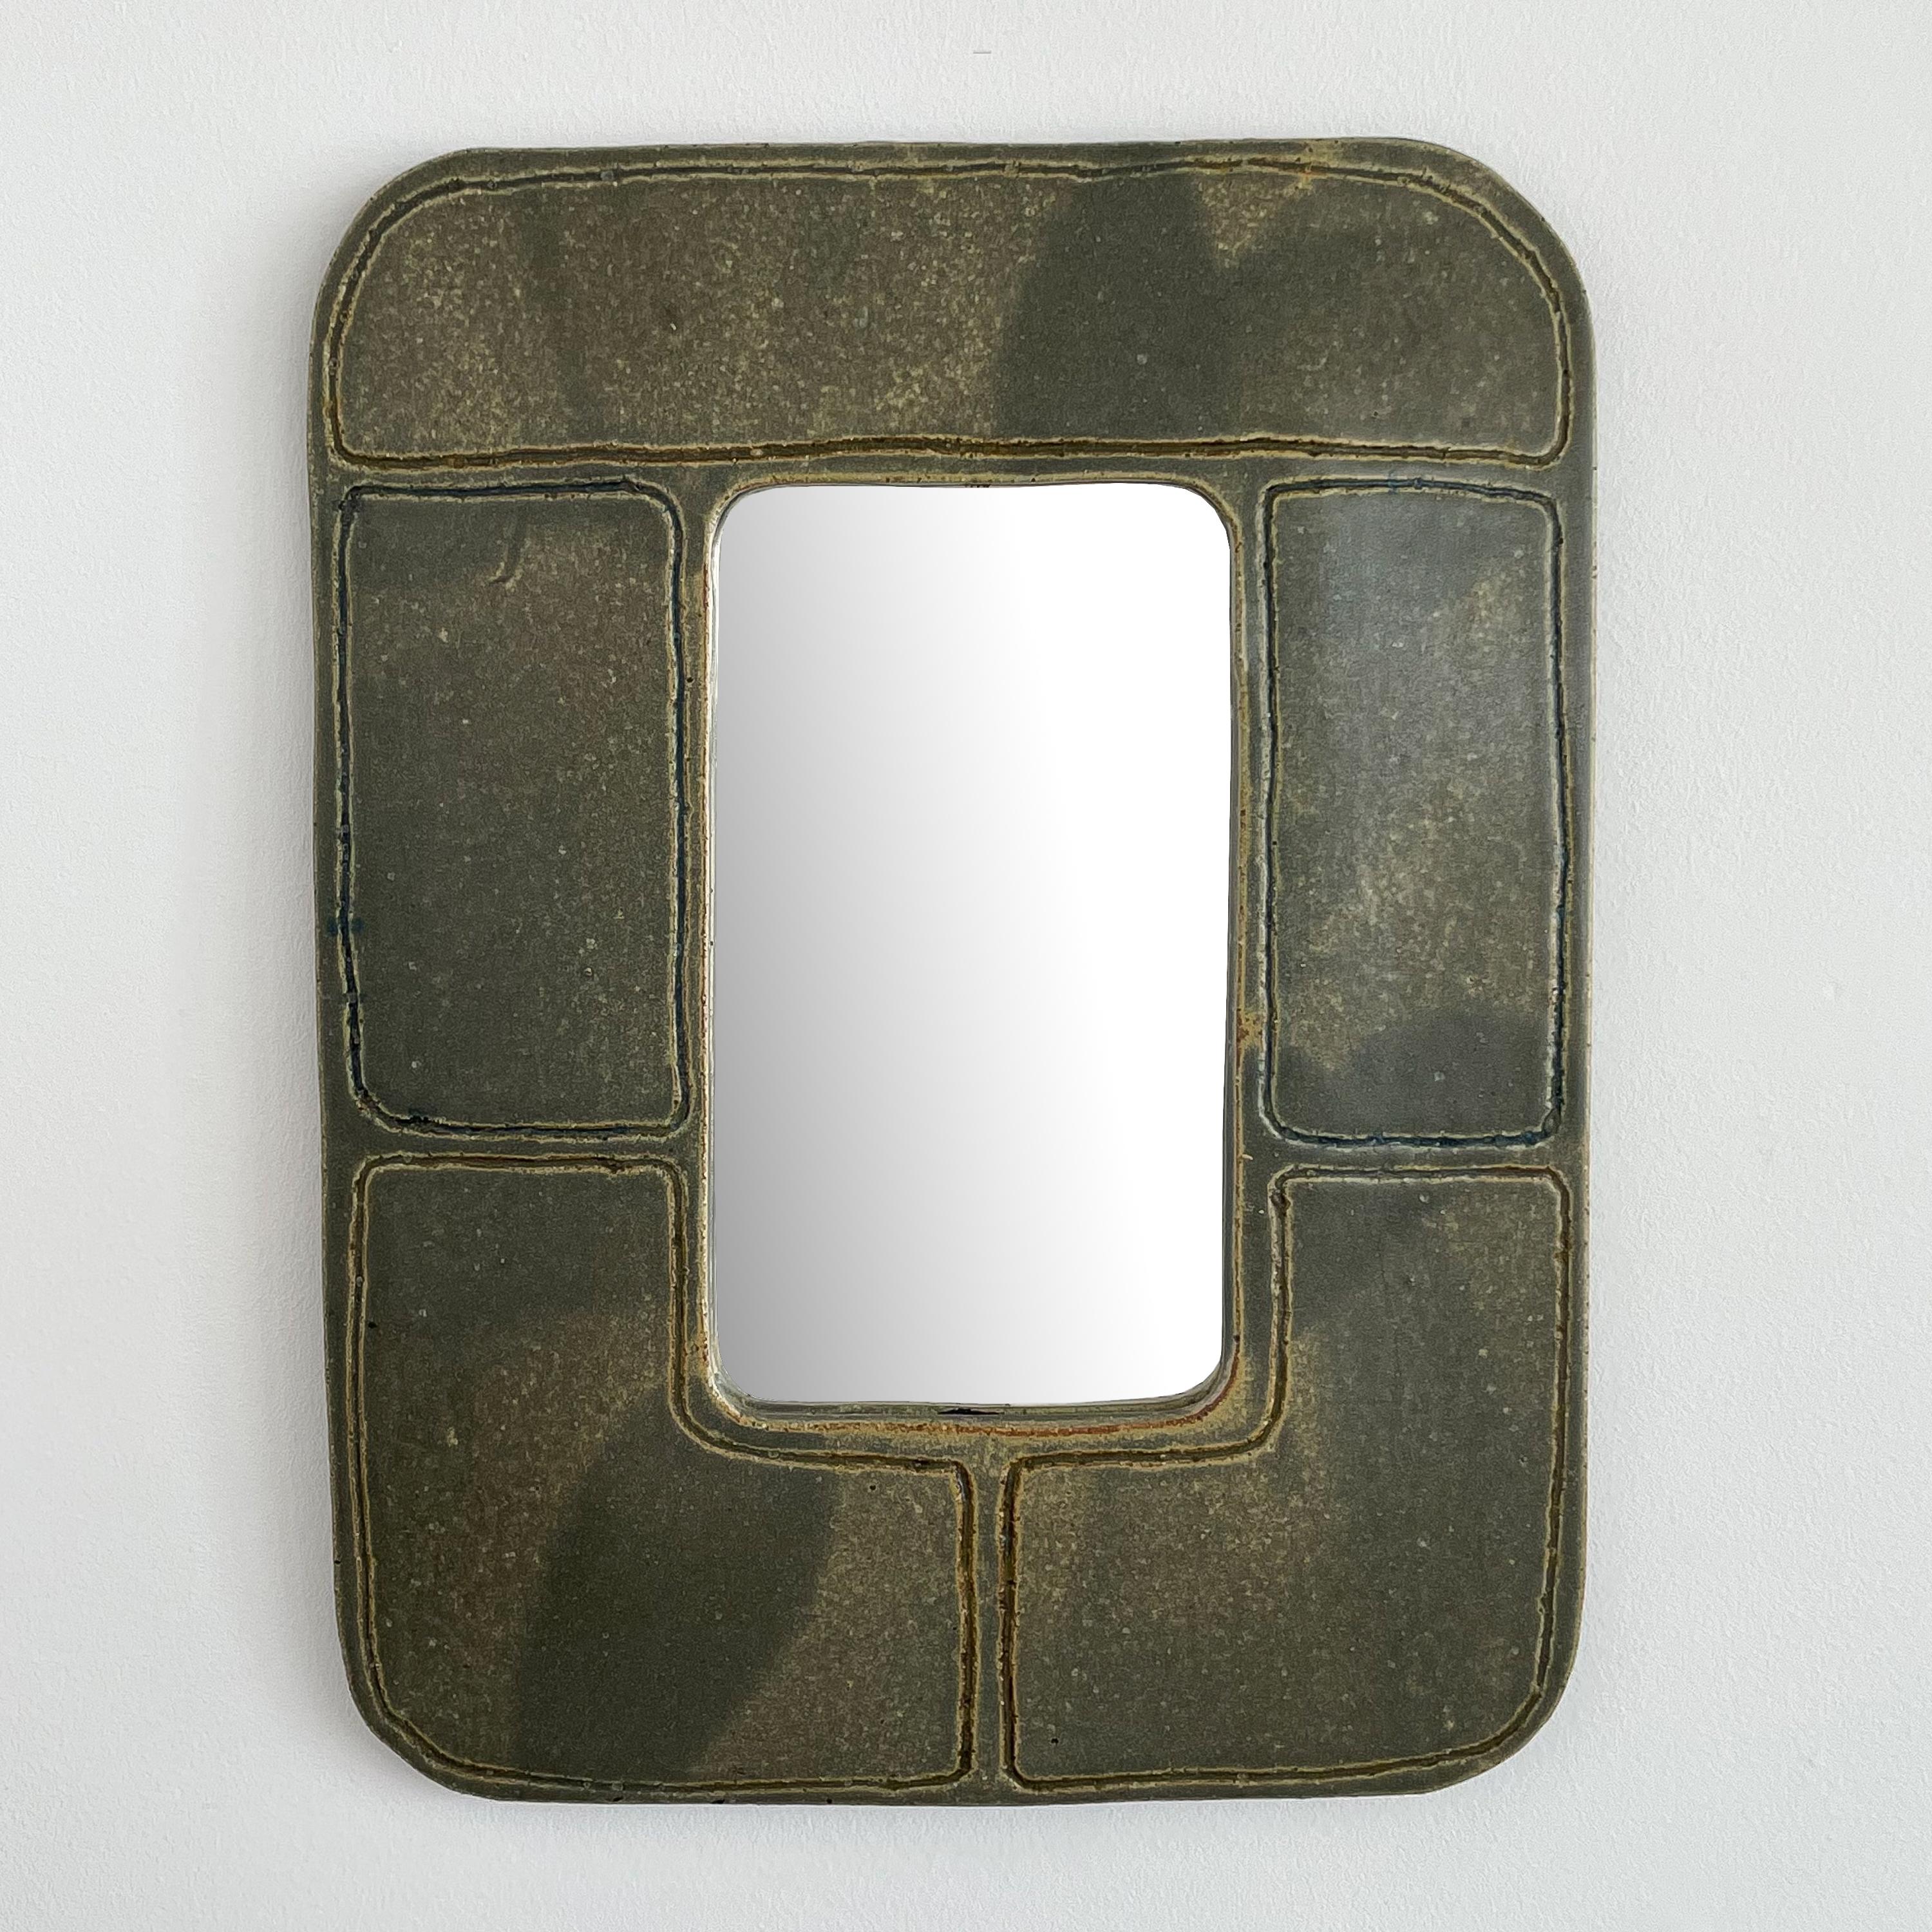 A 1960s stoneware pottery mirror by Massachusetts potter, Michael Cohen. This mirror features a hand built slab style frame with green glaze and incised minimalist geometric design. Signed with the Cohen mark and signature to the back. Cork covers